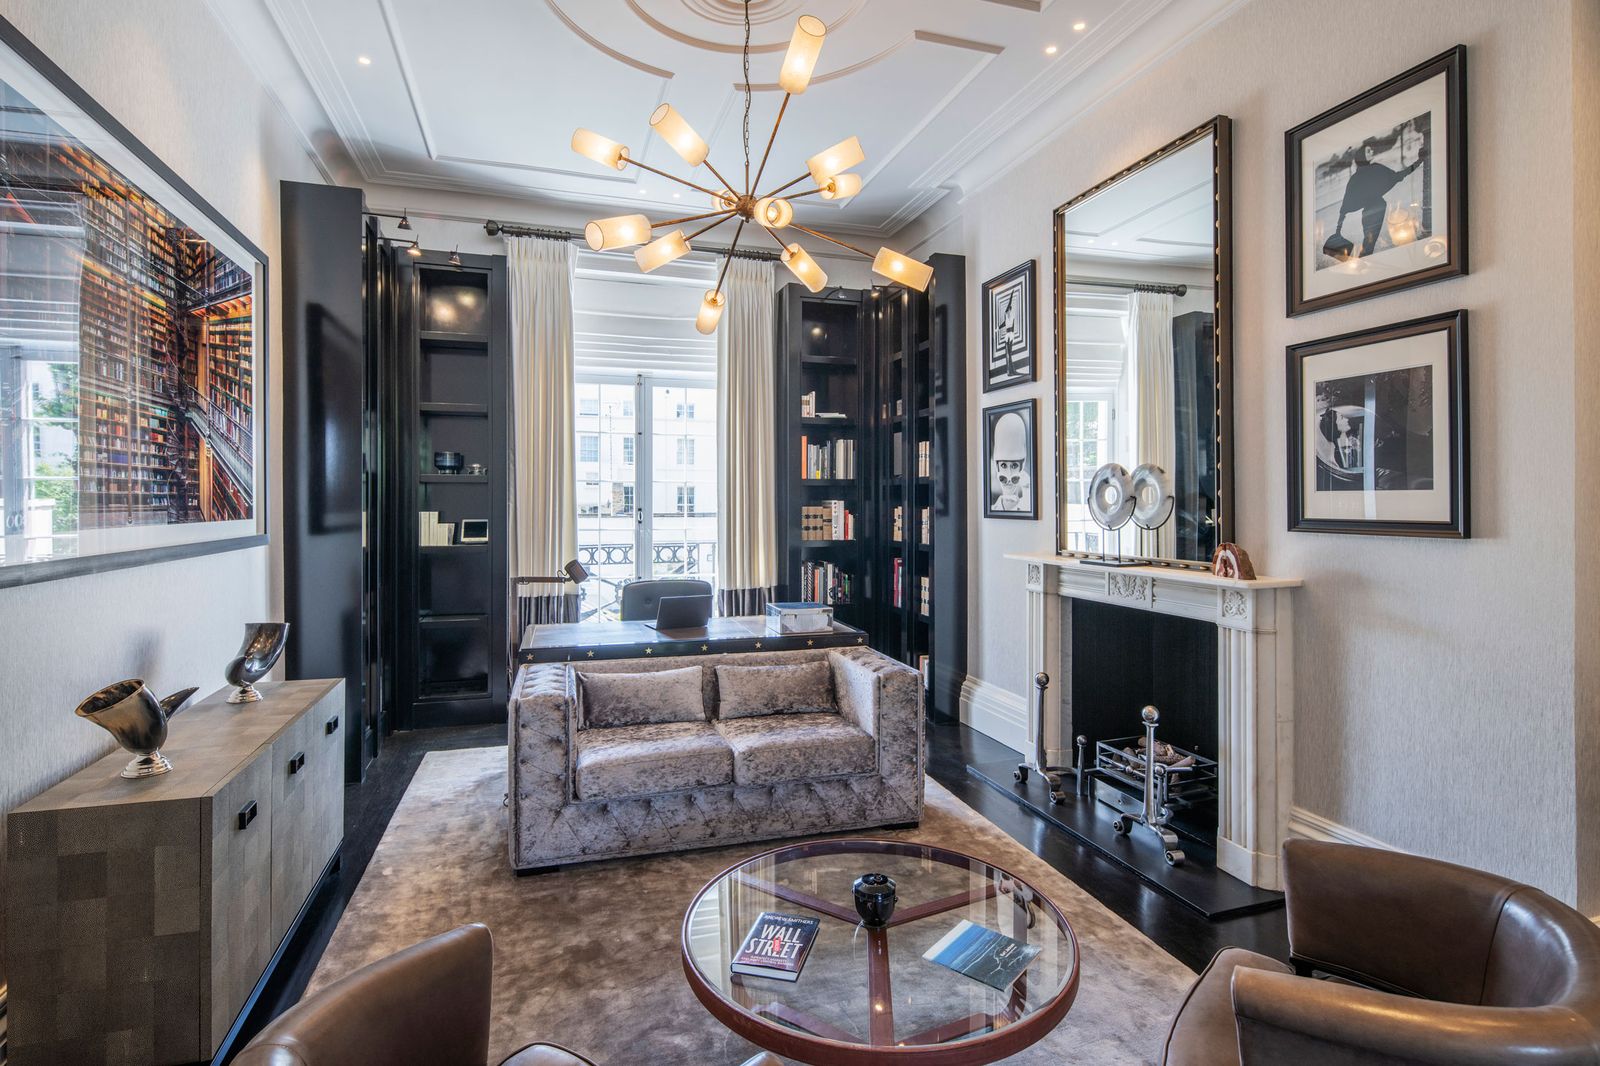 Rothschild tycoon's London home goes on sale for £17.95 million – take ...